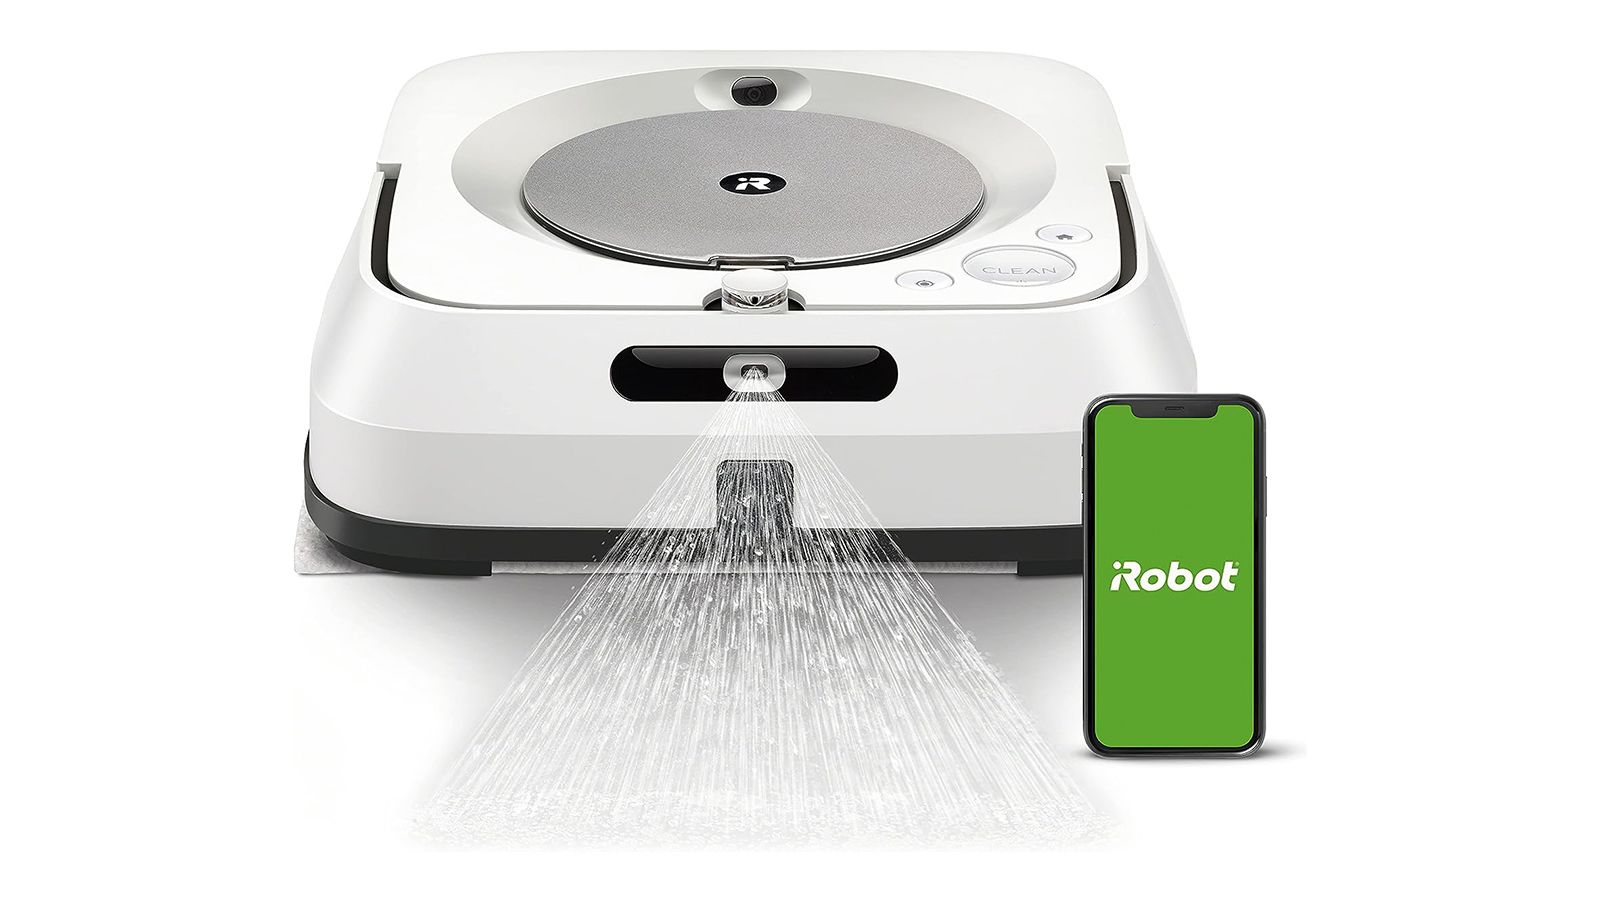 A $300 Roomba Shoppers Call 'the Best House Purchase' Is $189 at